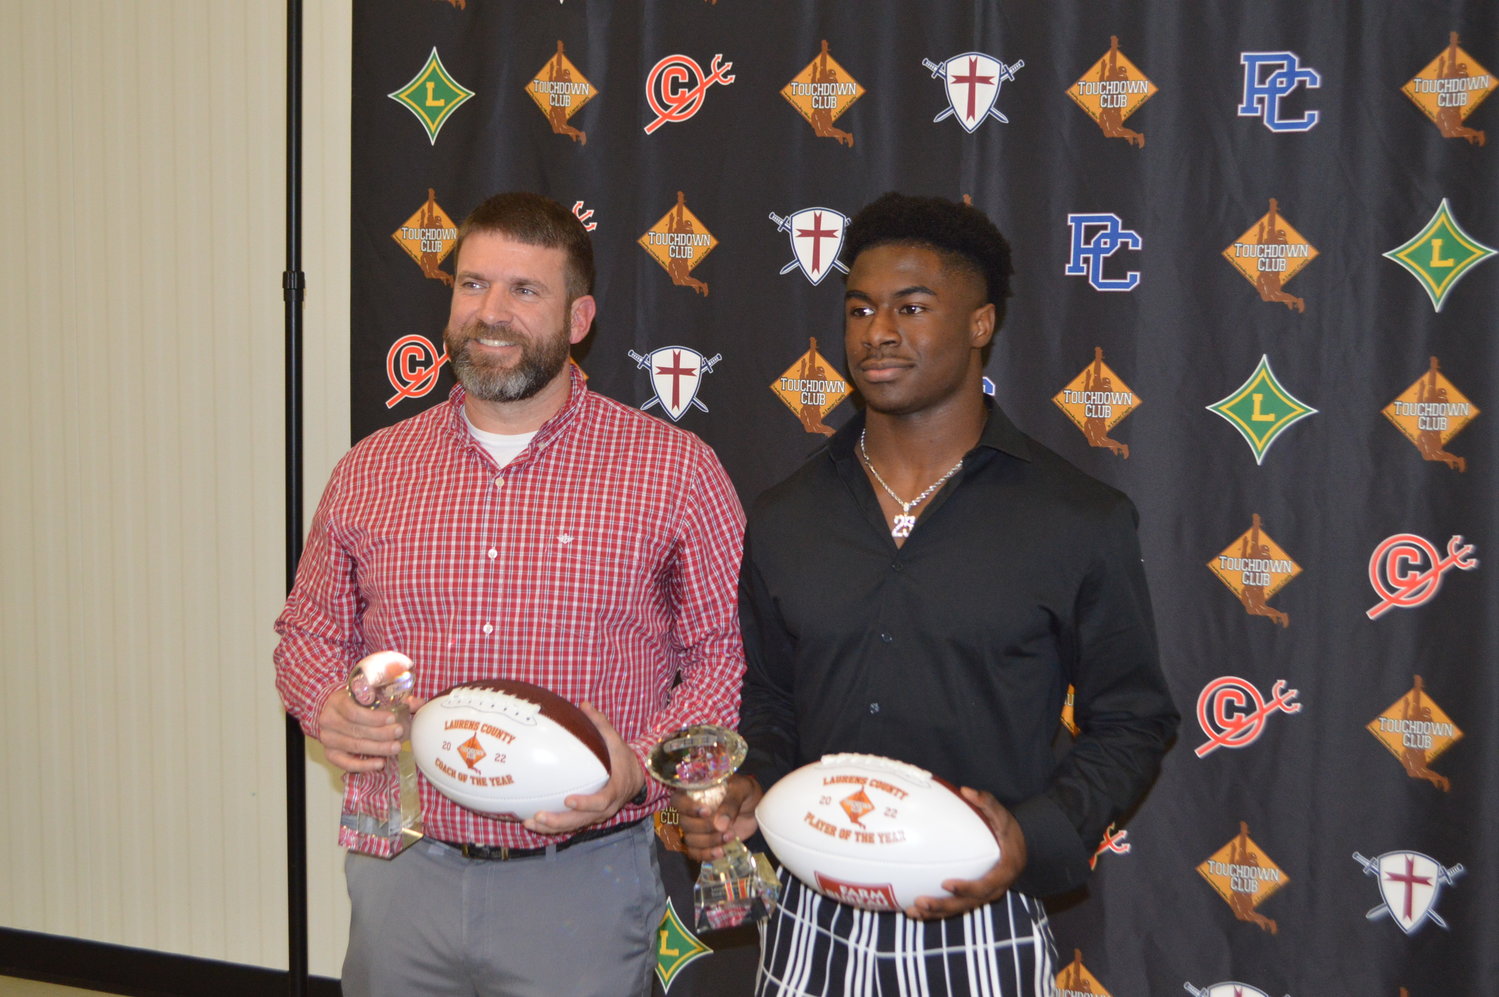 Corey Fountain is the Laurens County Touchdown Club Coach of the Year and Region Coach of the Year, and Bryson James is the Laurens County Touchdown Club Player of the Year and Region IV Player of the Year.